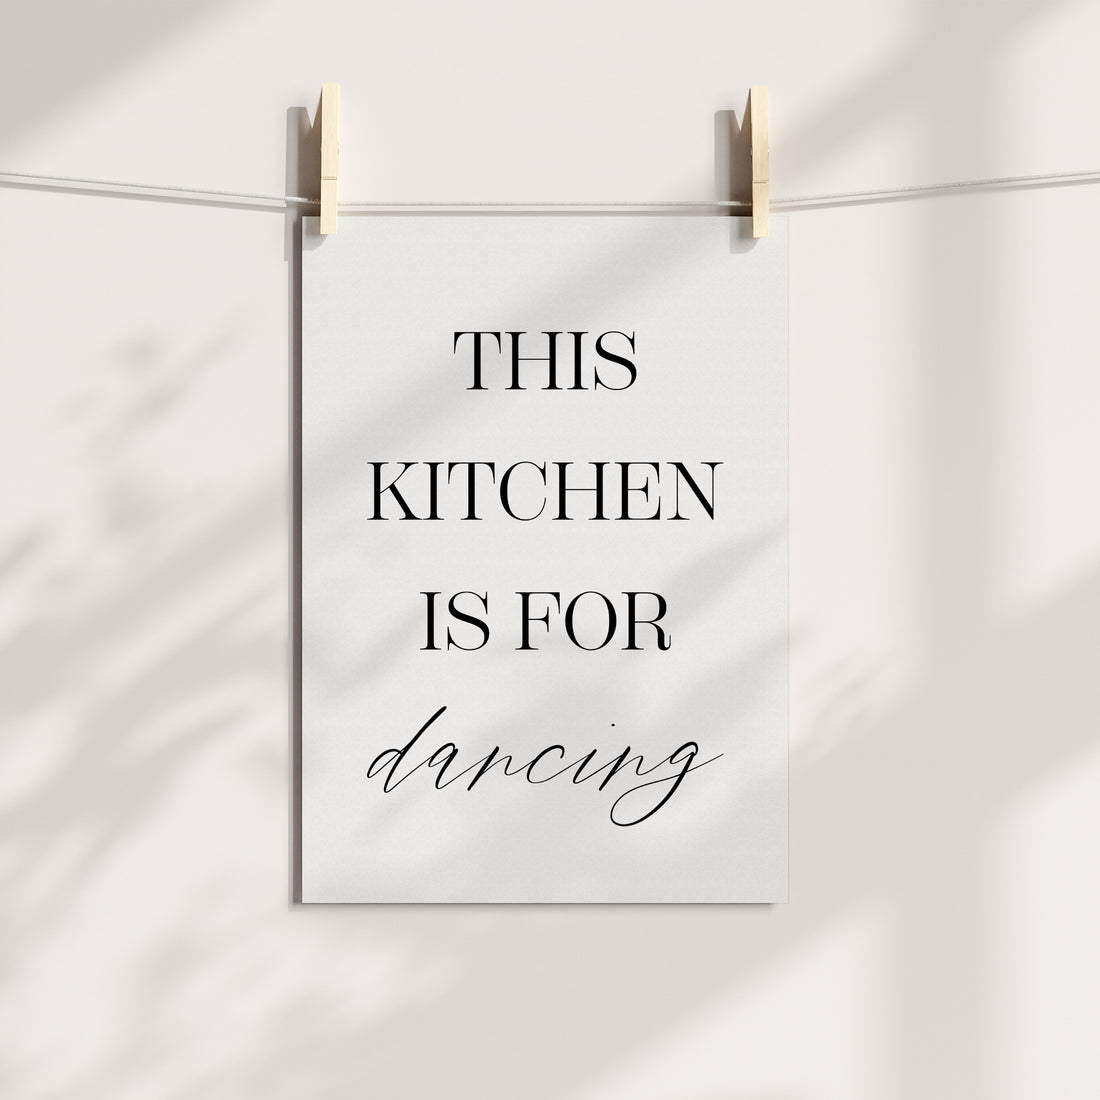 This Kitchen Is For Dancing - Kitchen Typography Printable Art